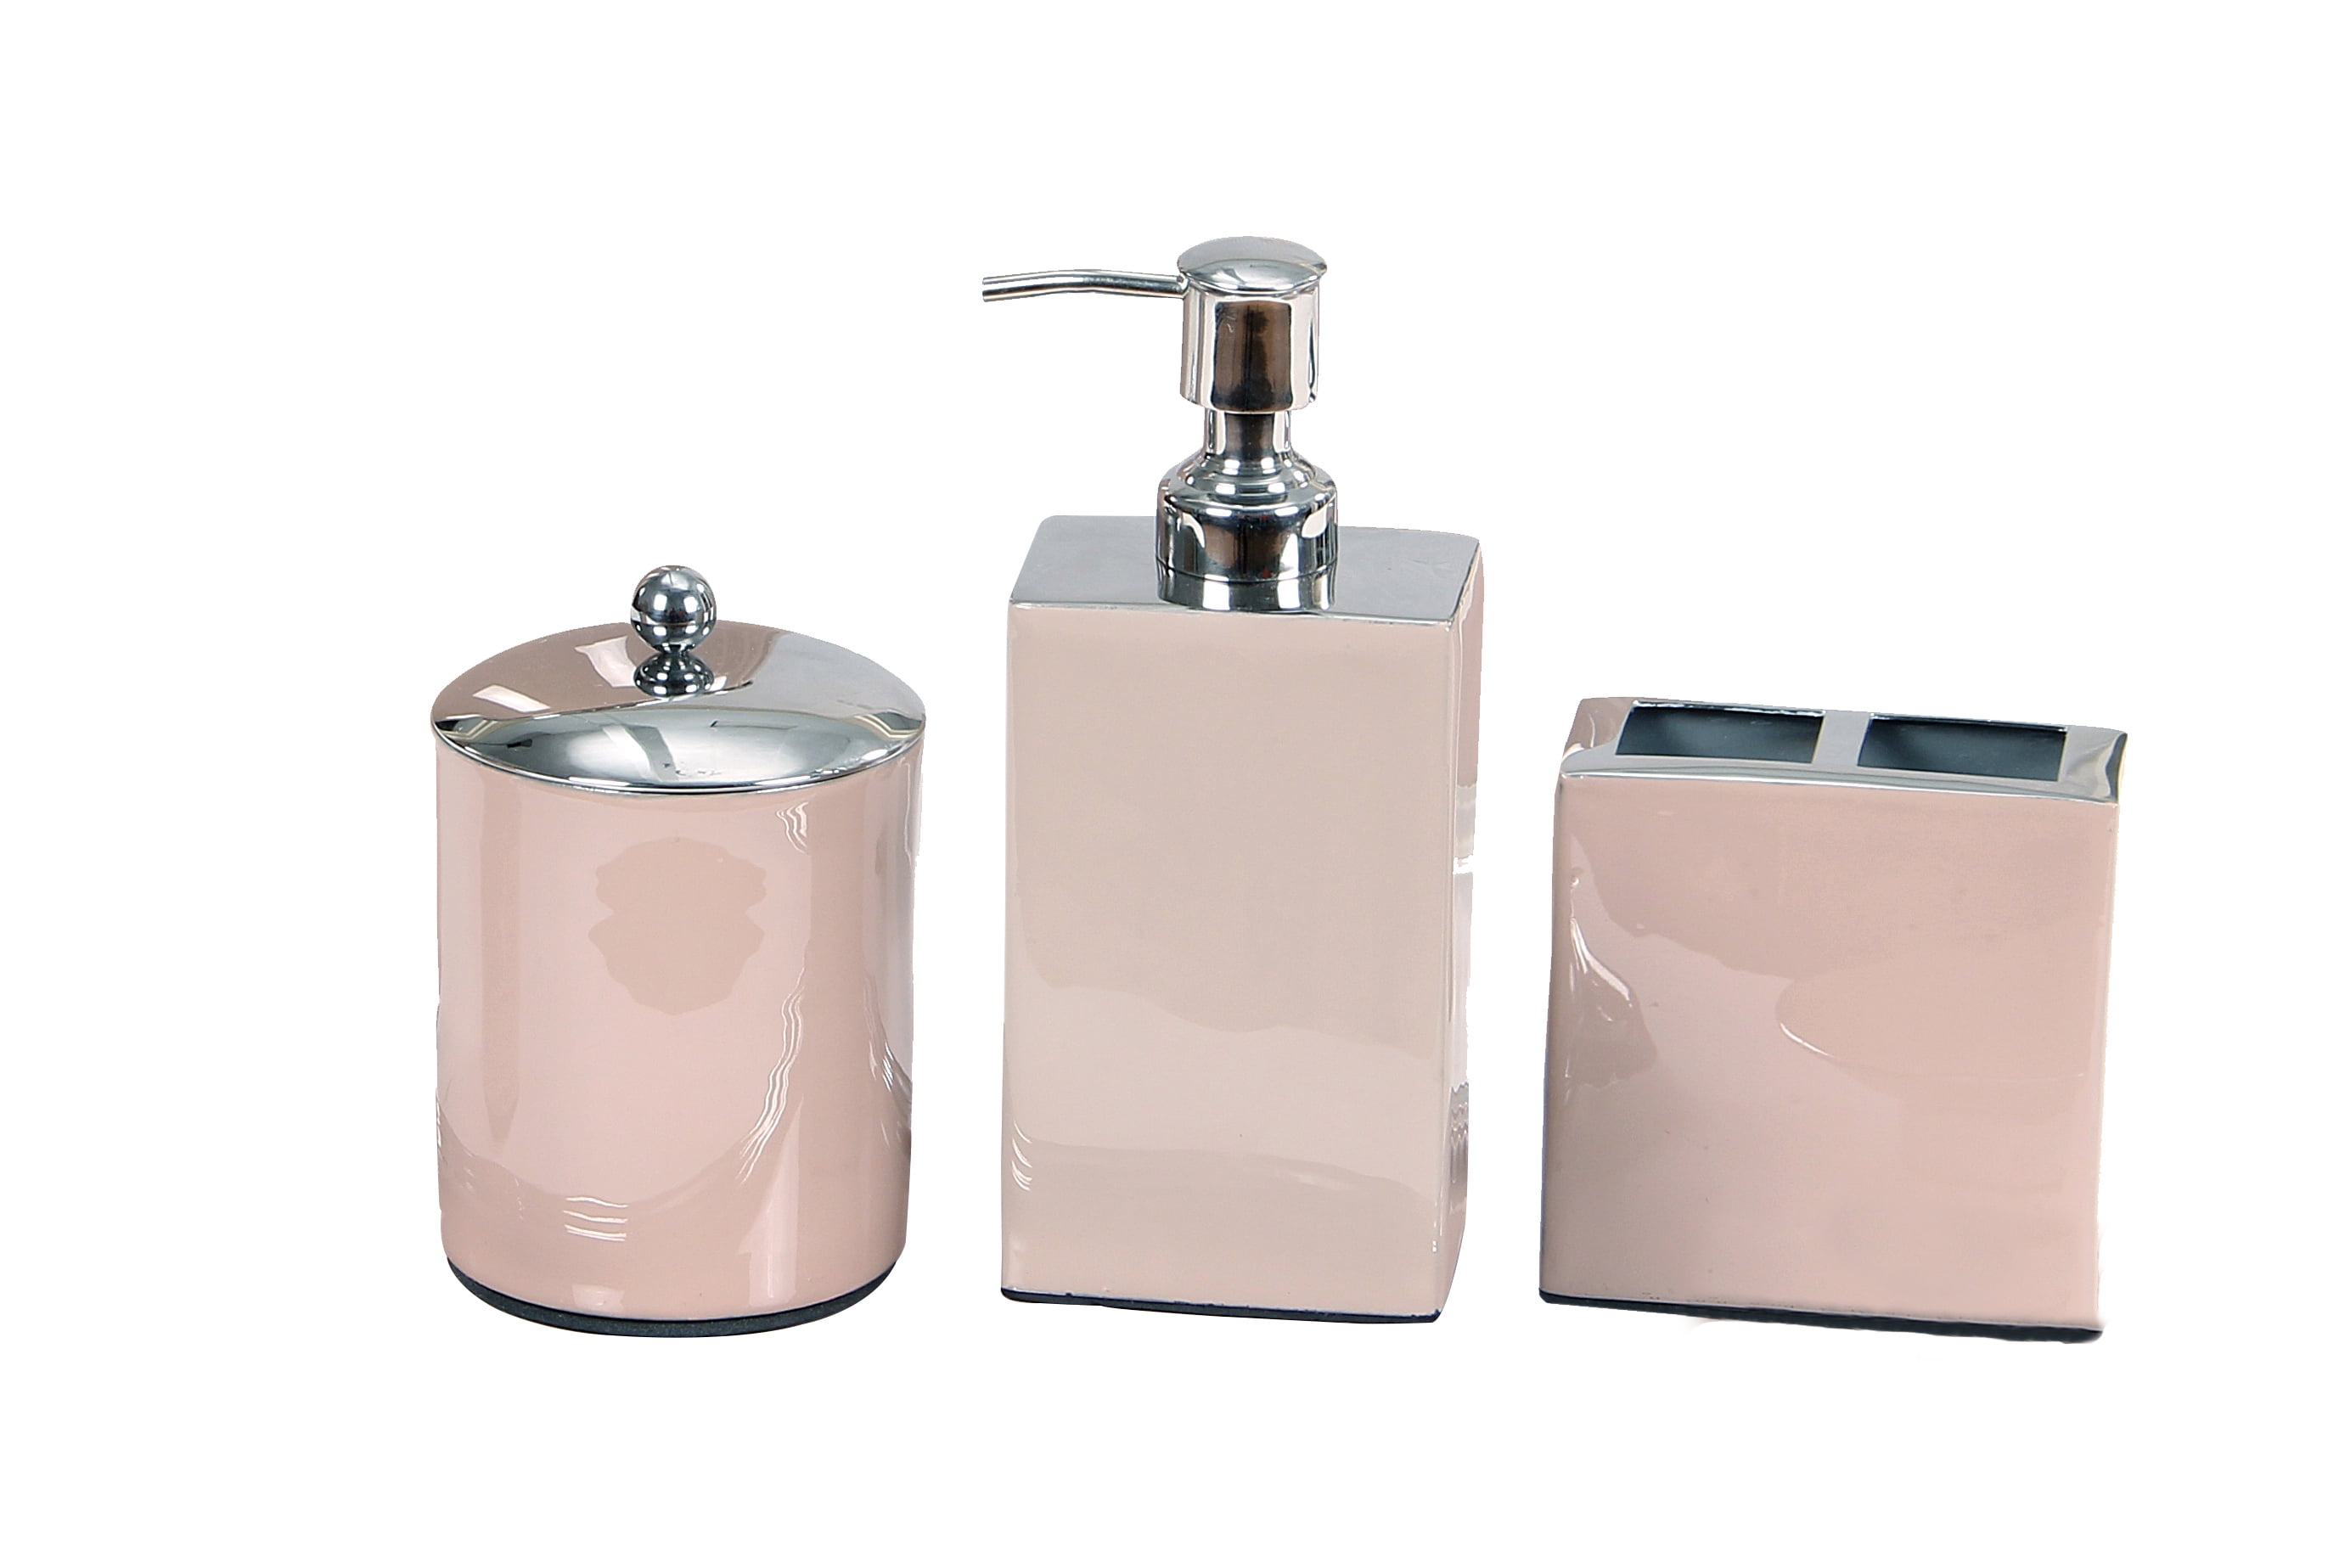 Better Trends Trier 3 Piece Stainless Steel Bath Accessories Set, for Adult  - Rose